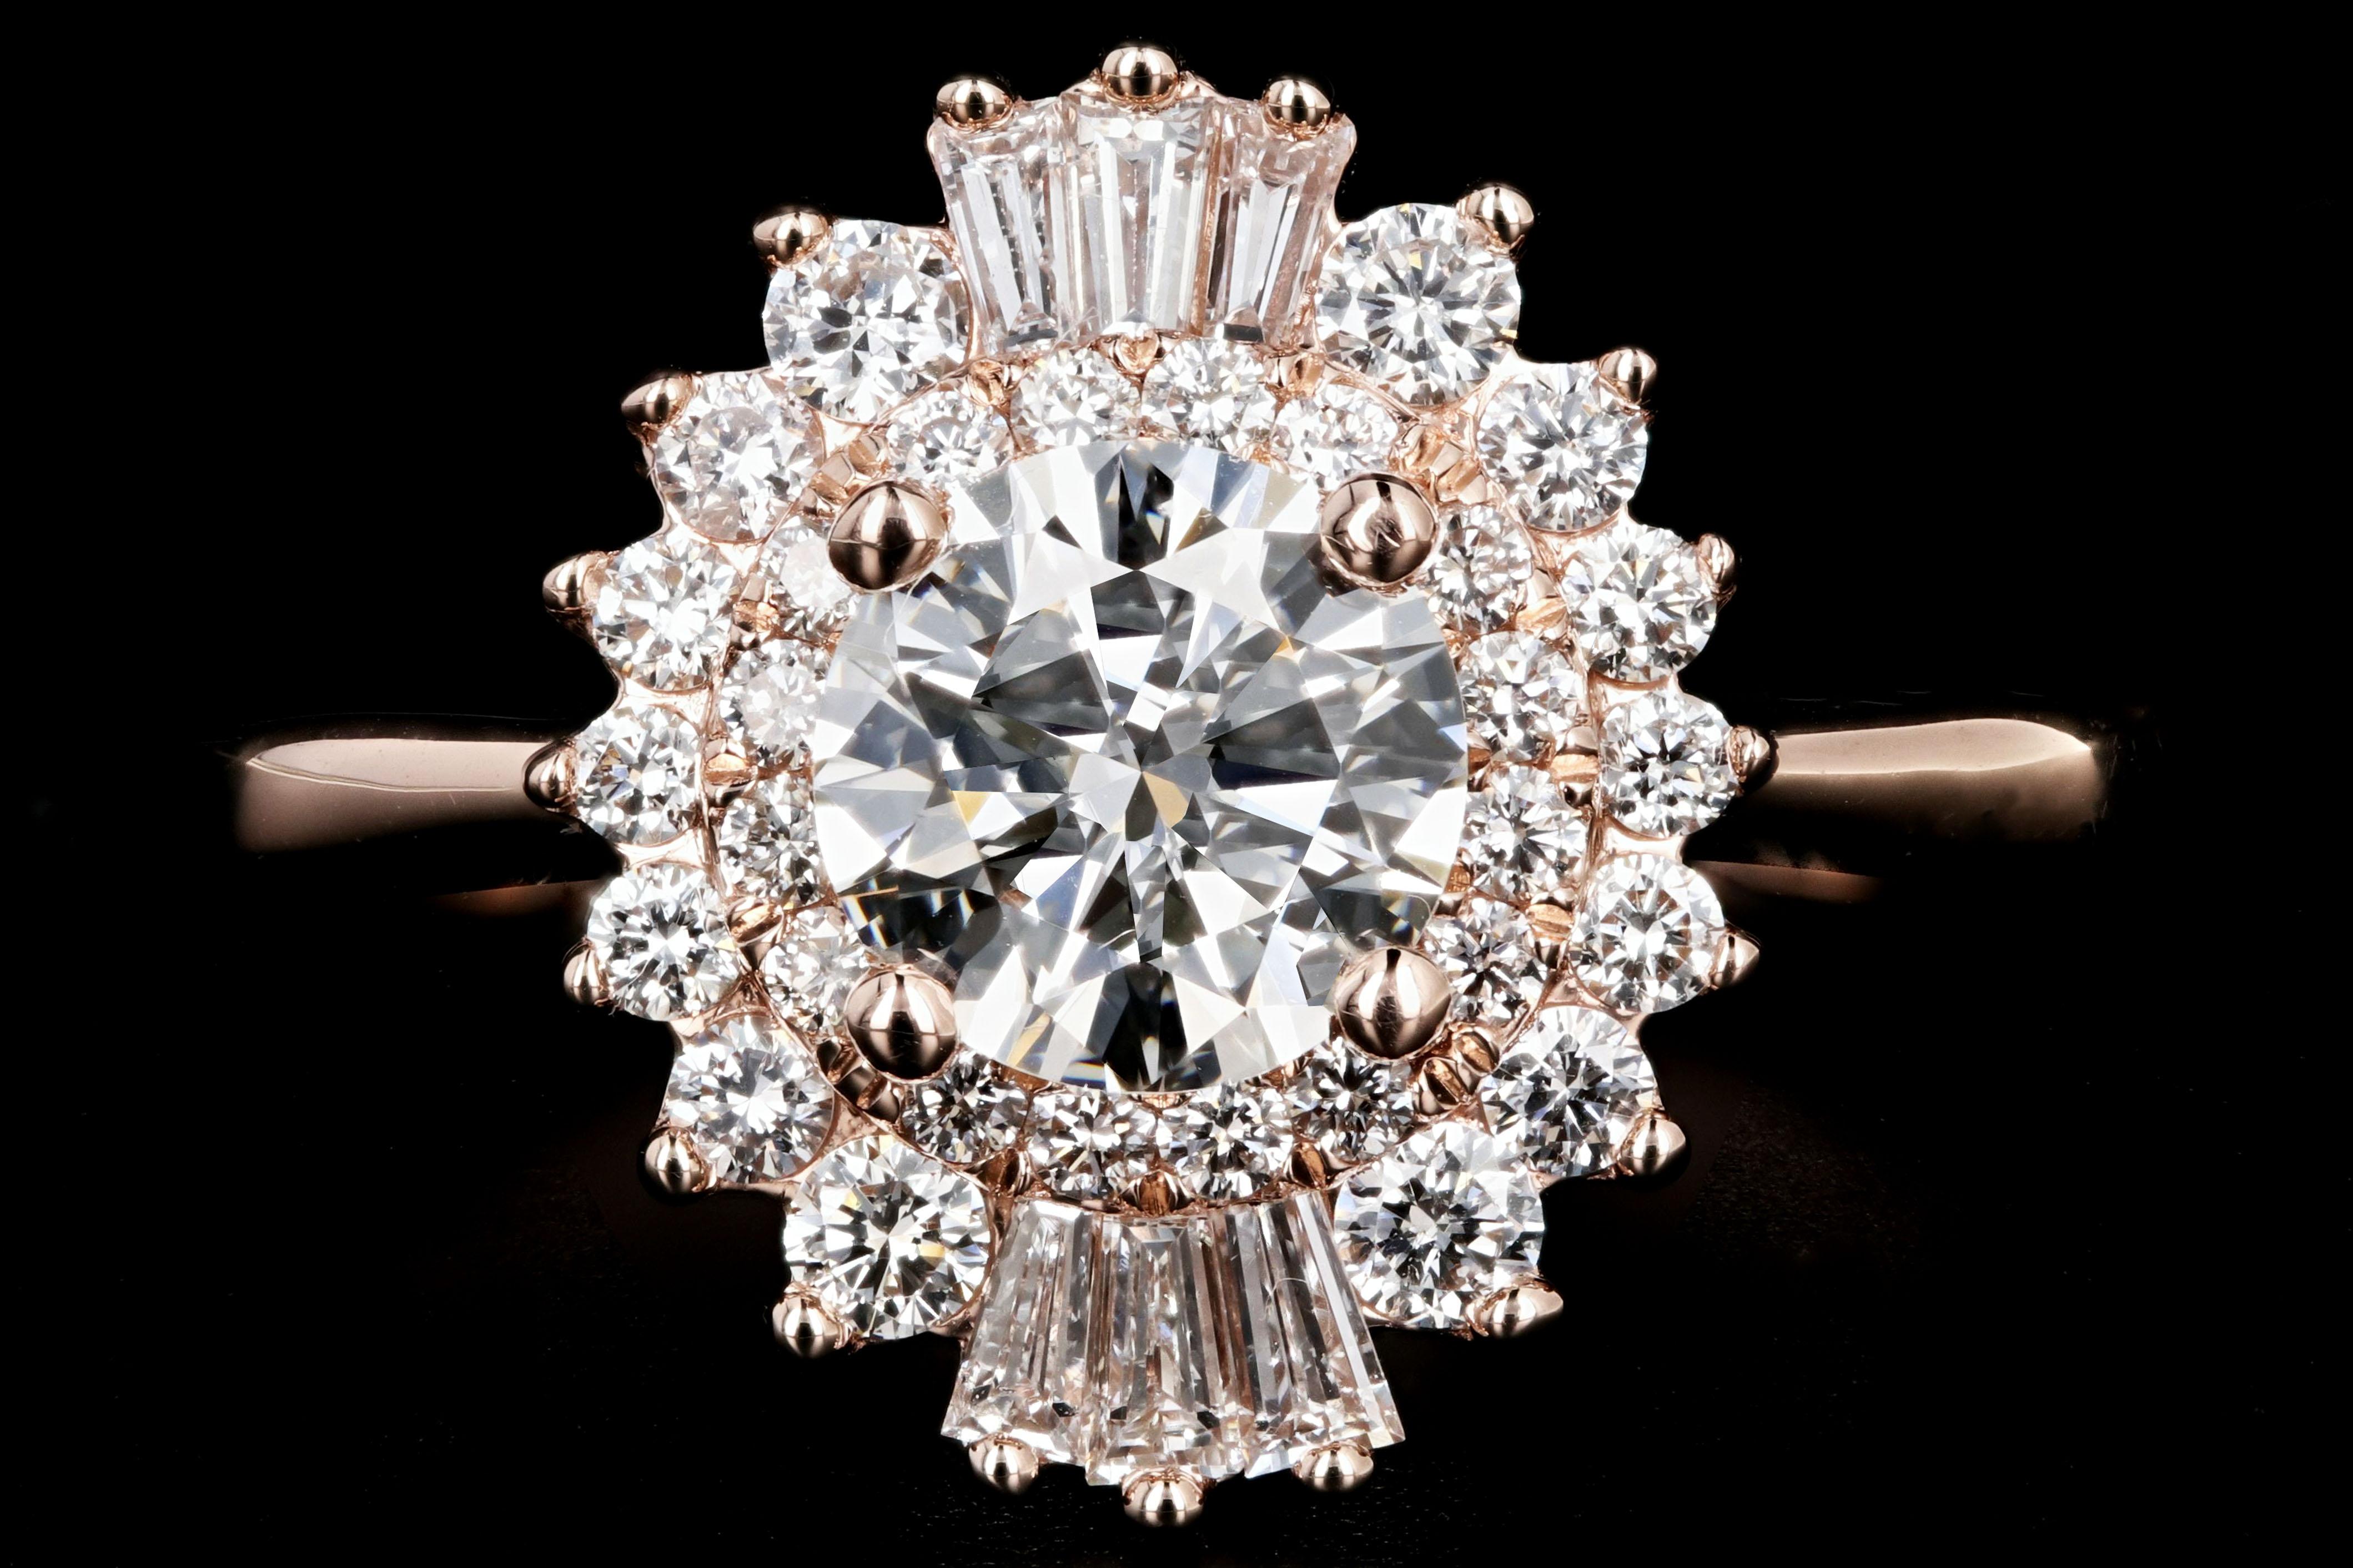 Era: New

Composition: 14K Rose Gold

Primary Stone: Round Brilliant Cut Diamond

Stone Carat Weight: .88 Carats

Color/ Clarity: I VS2

Accent Stone: Round and Tapered Baguette Cut Diamonds

Accent Stone Carat Weight: .62 Carats

Color/ Clarity: